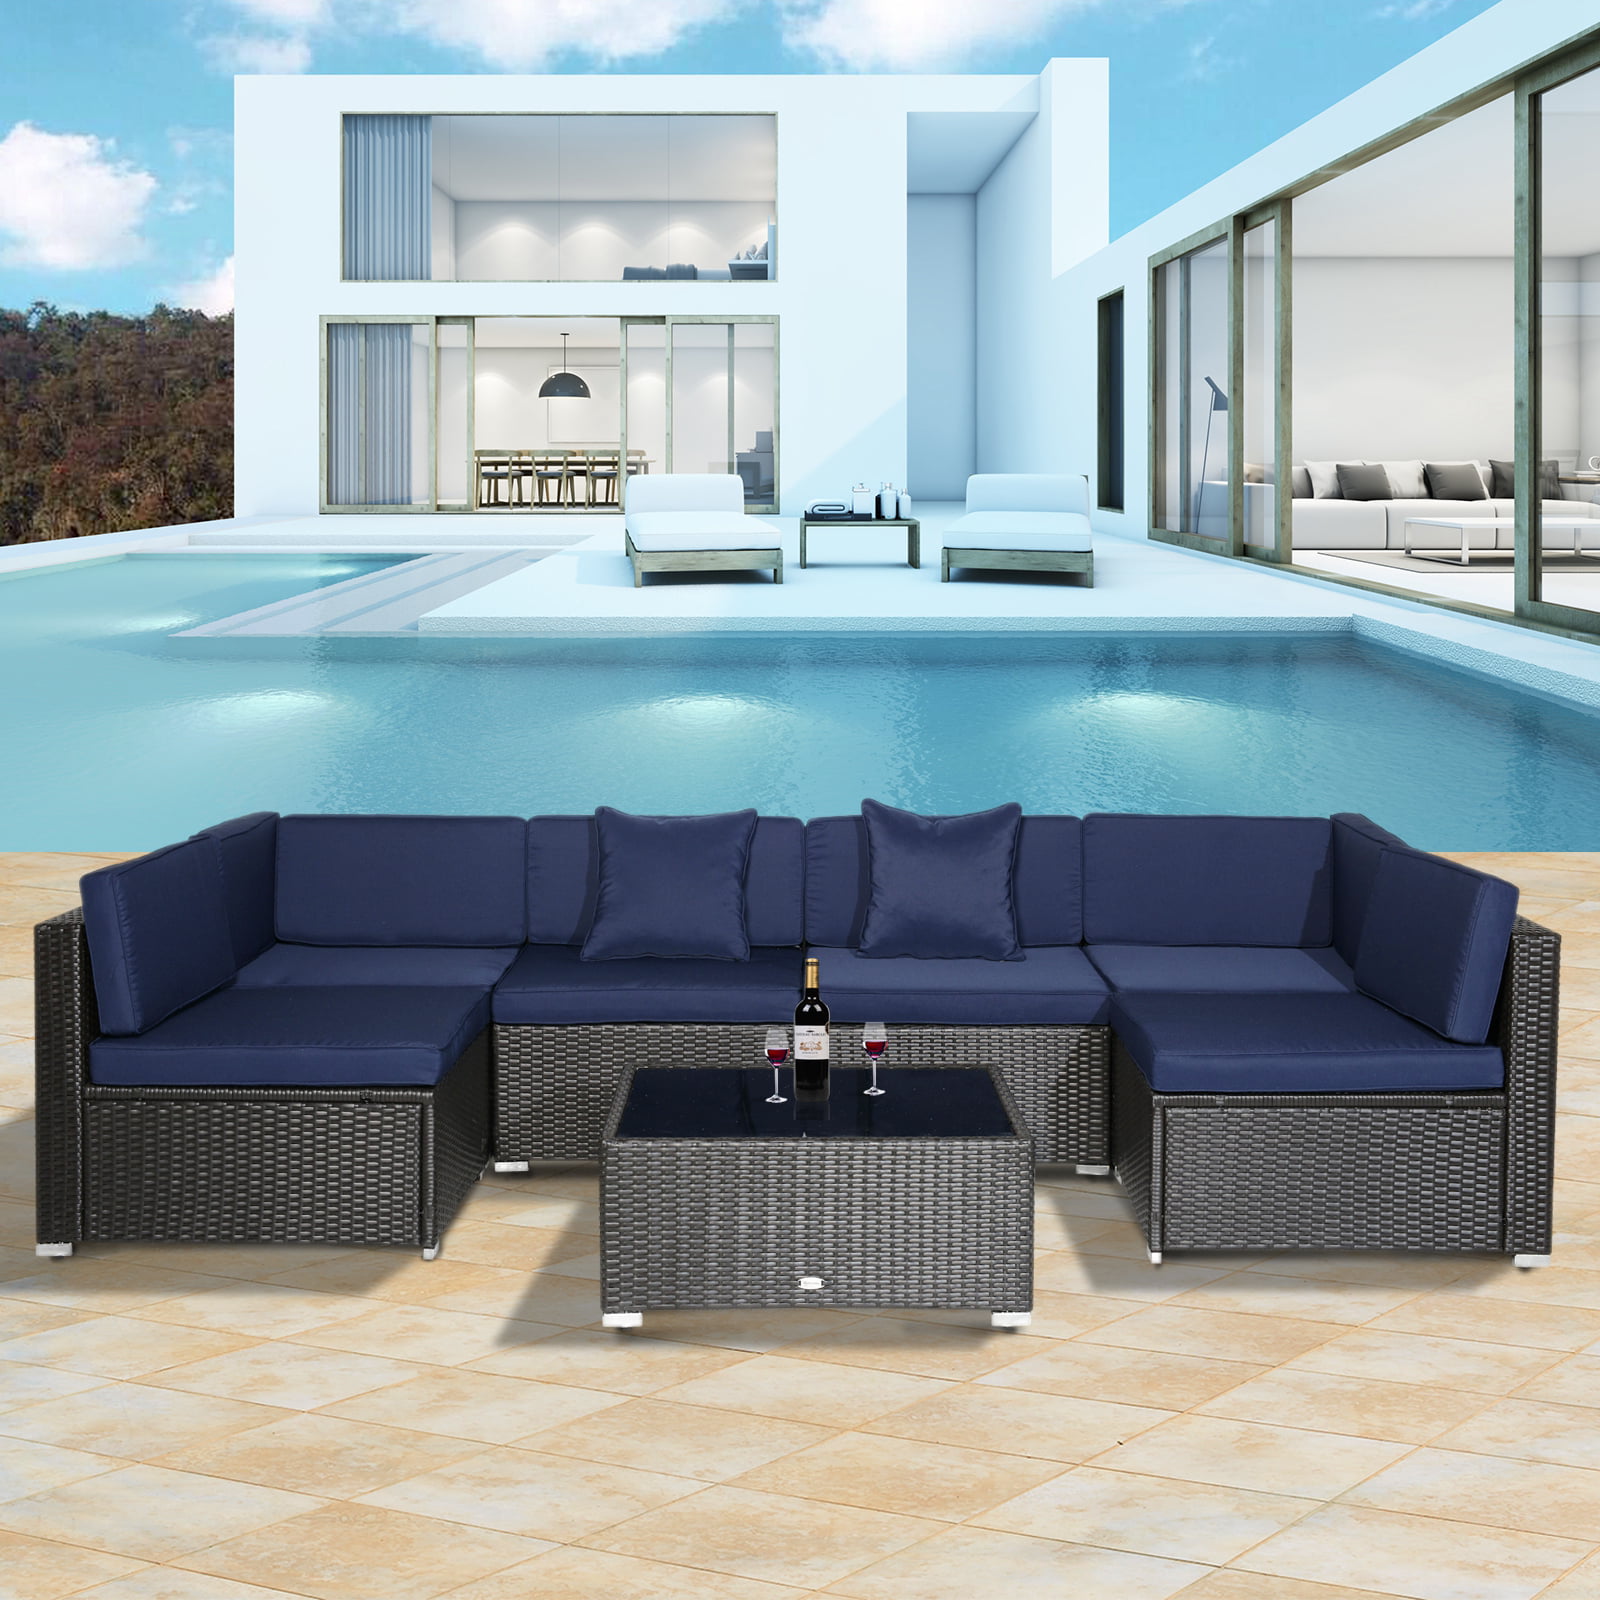 Outsunny 7 Piece Patio Wicker Sofa Set Sectional Rattan Outdoor 